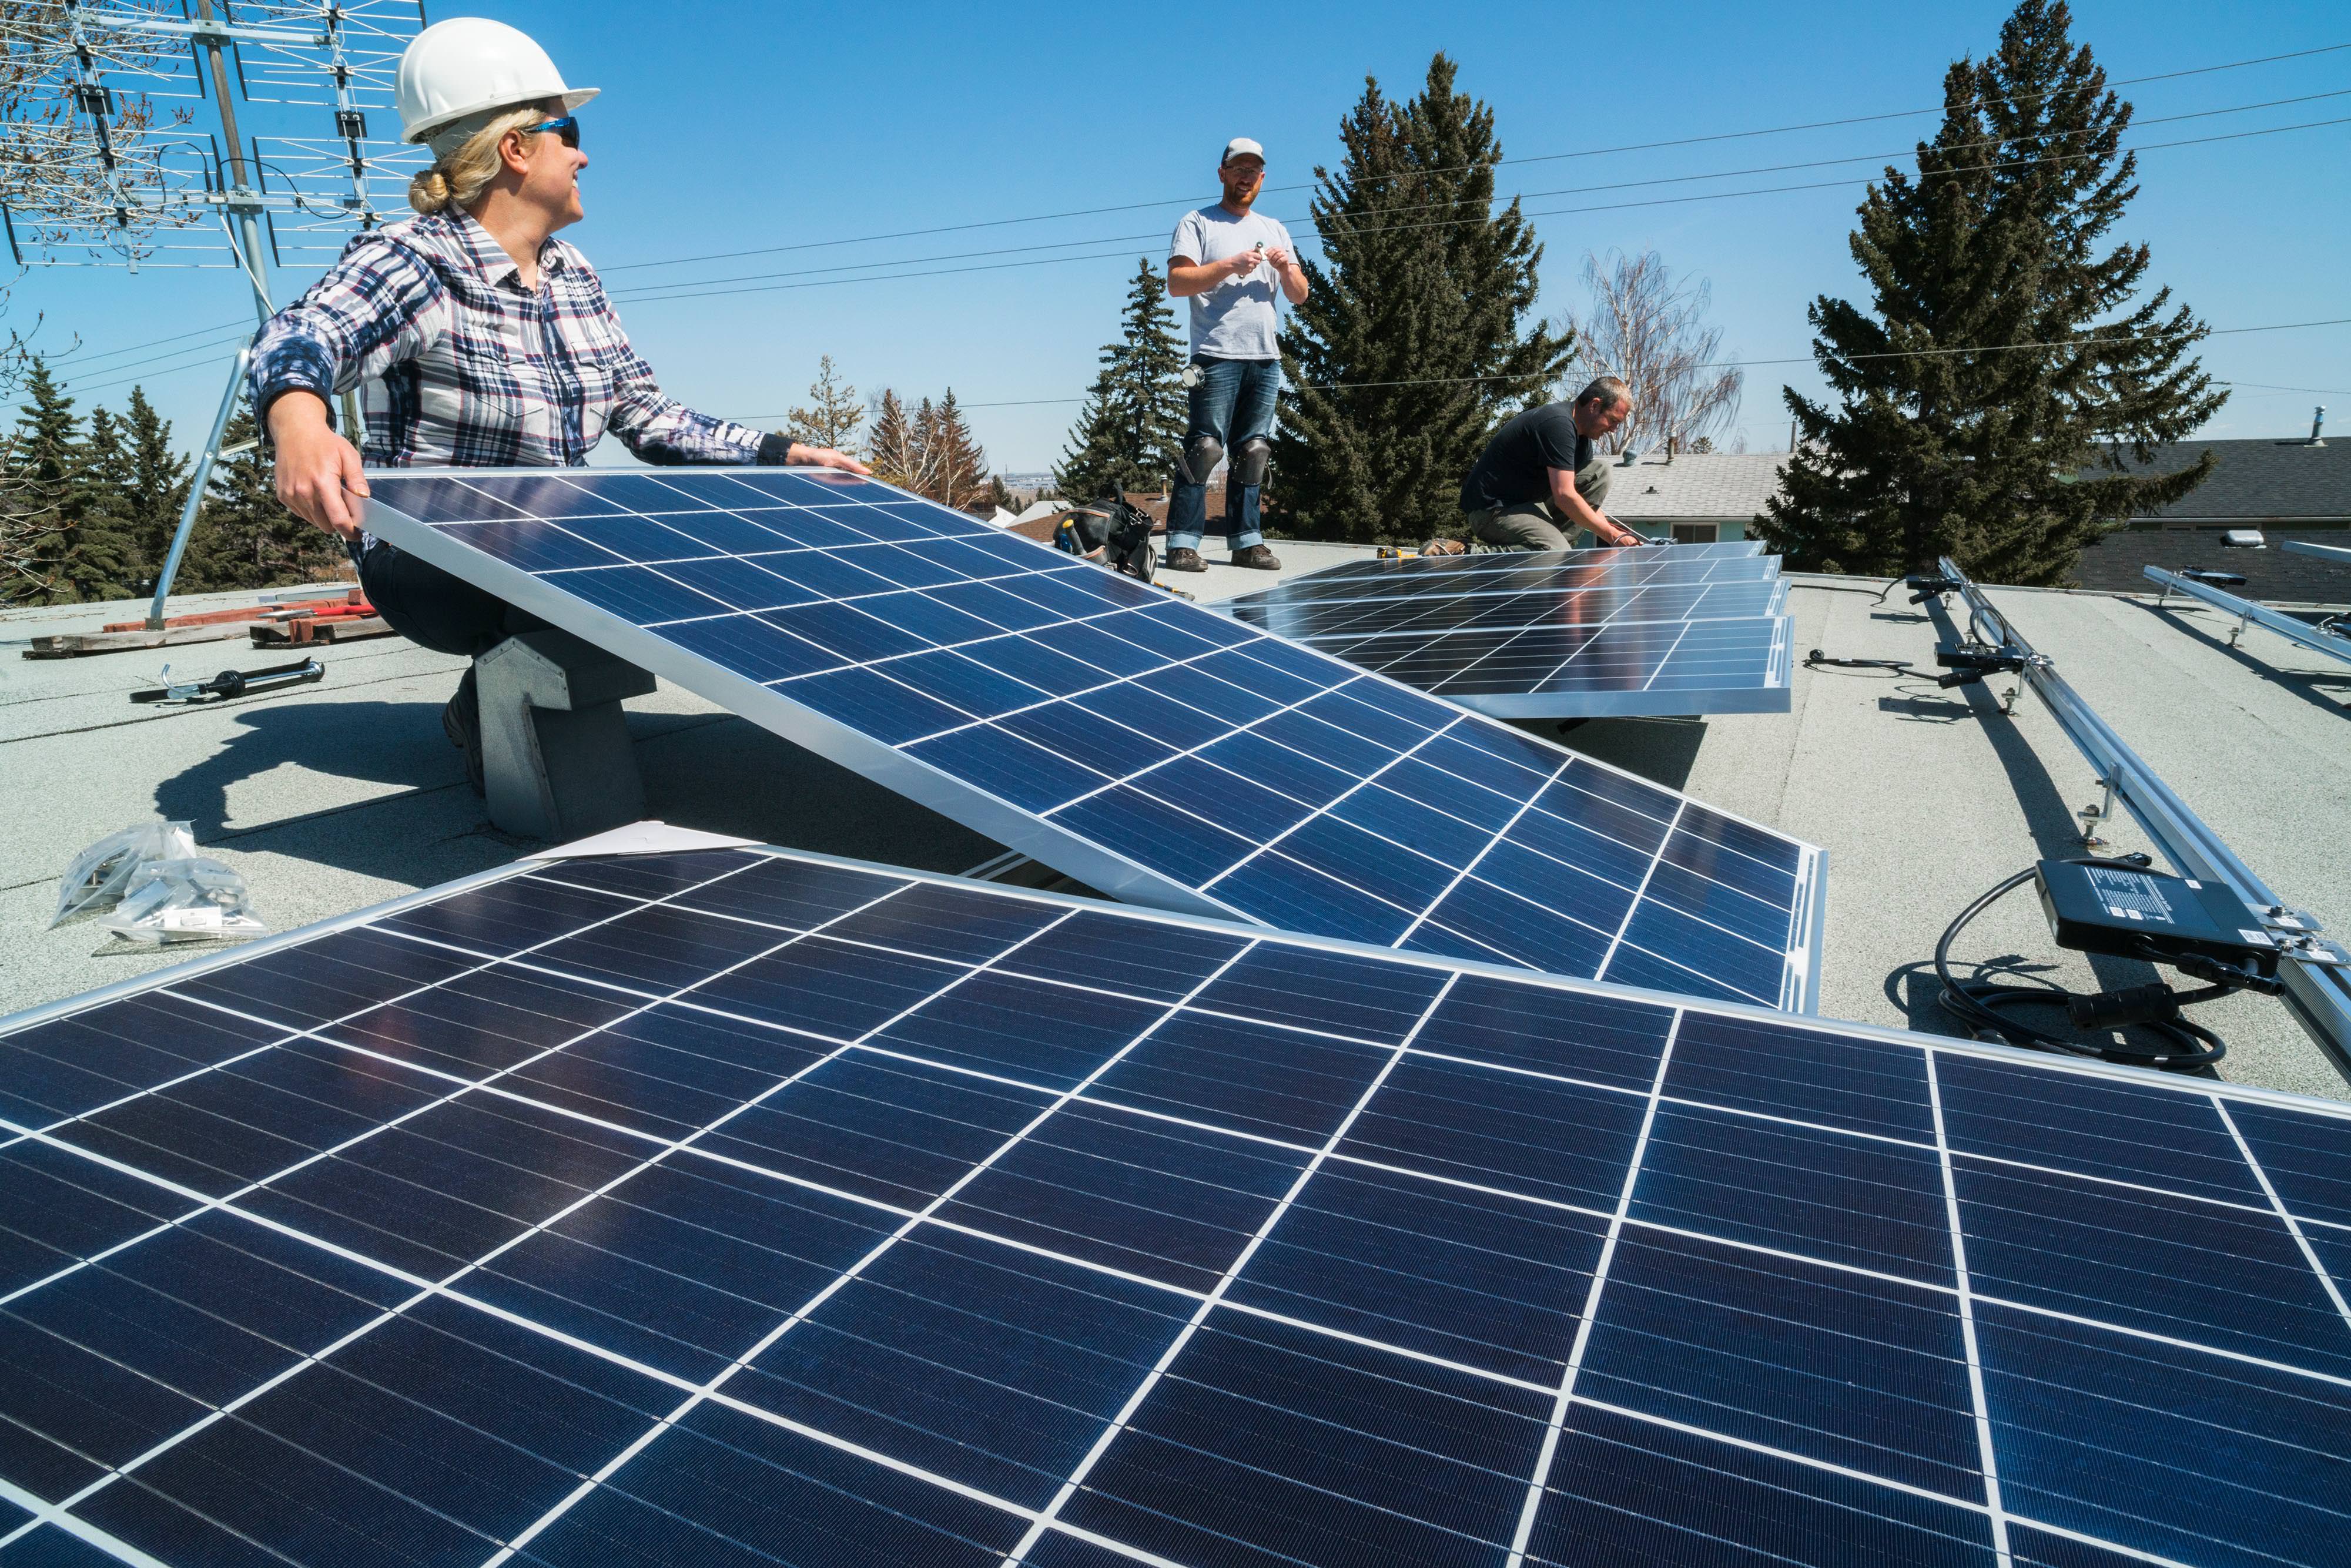 Workers install solar panels on roof.